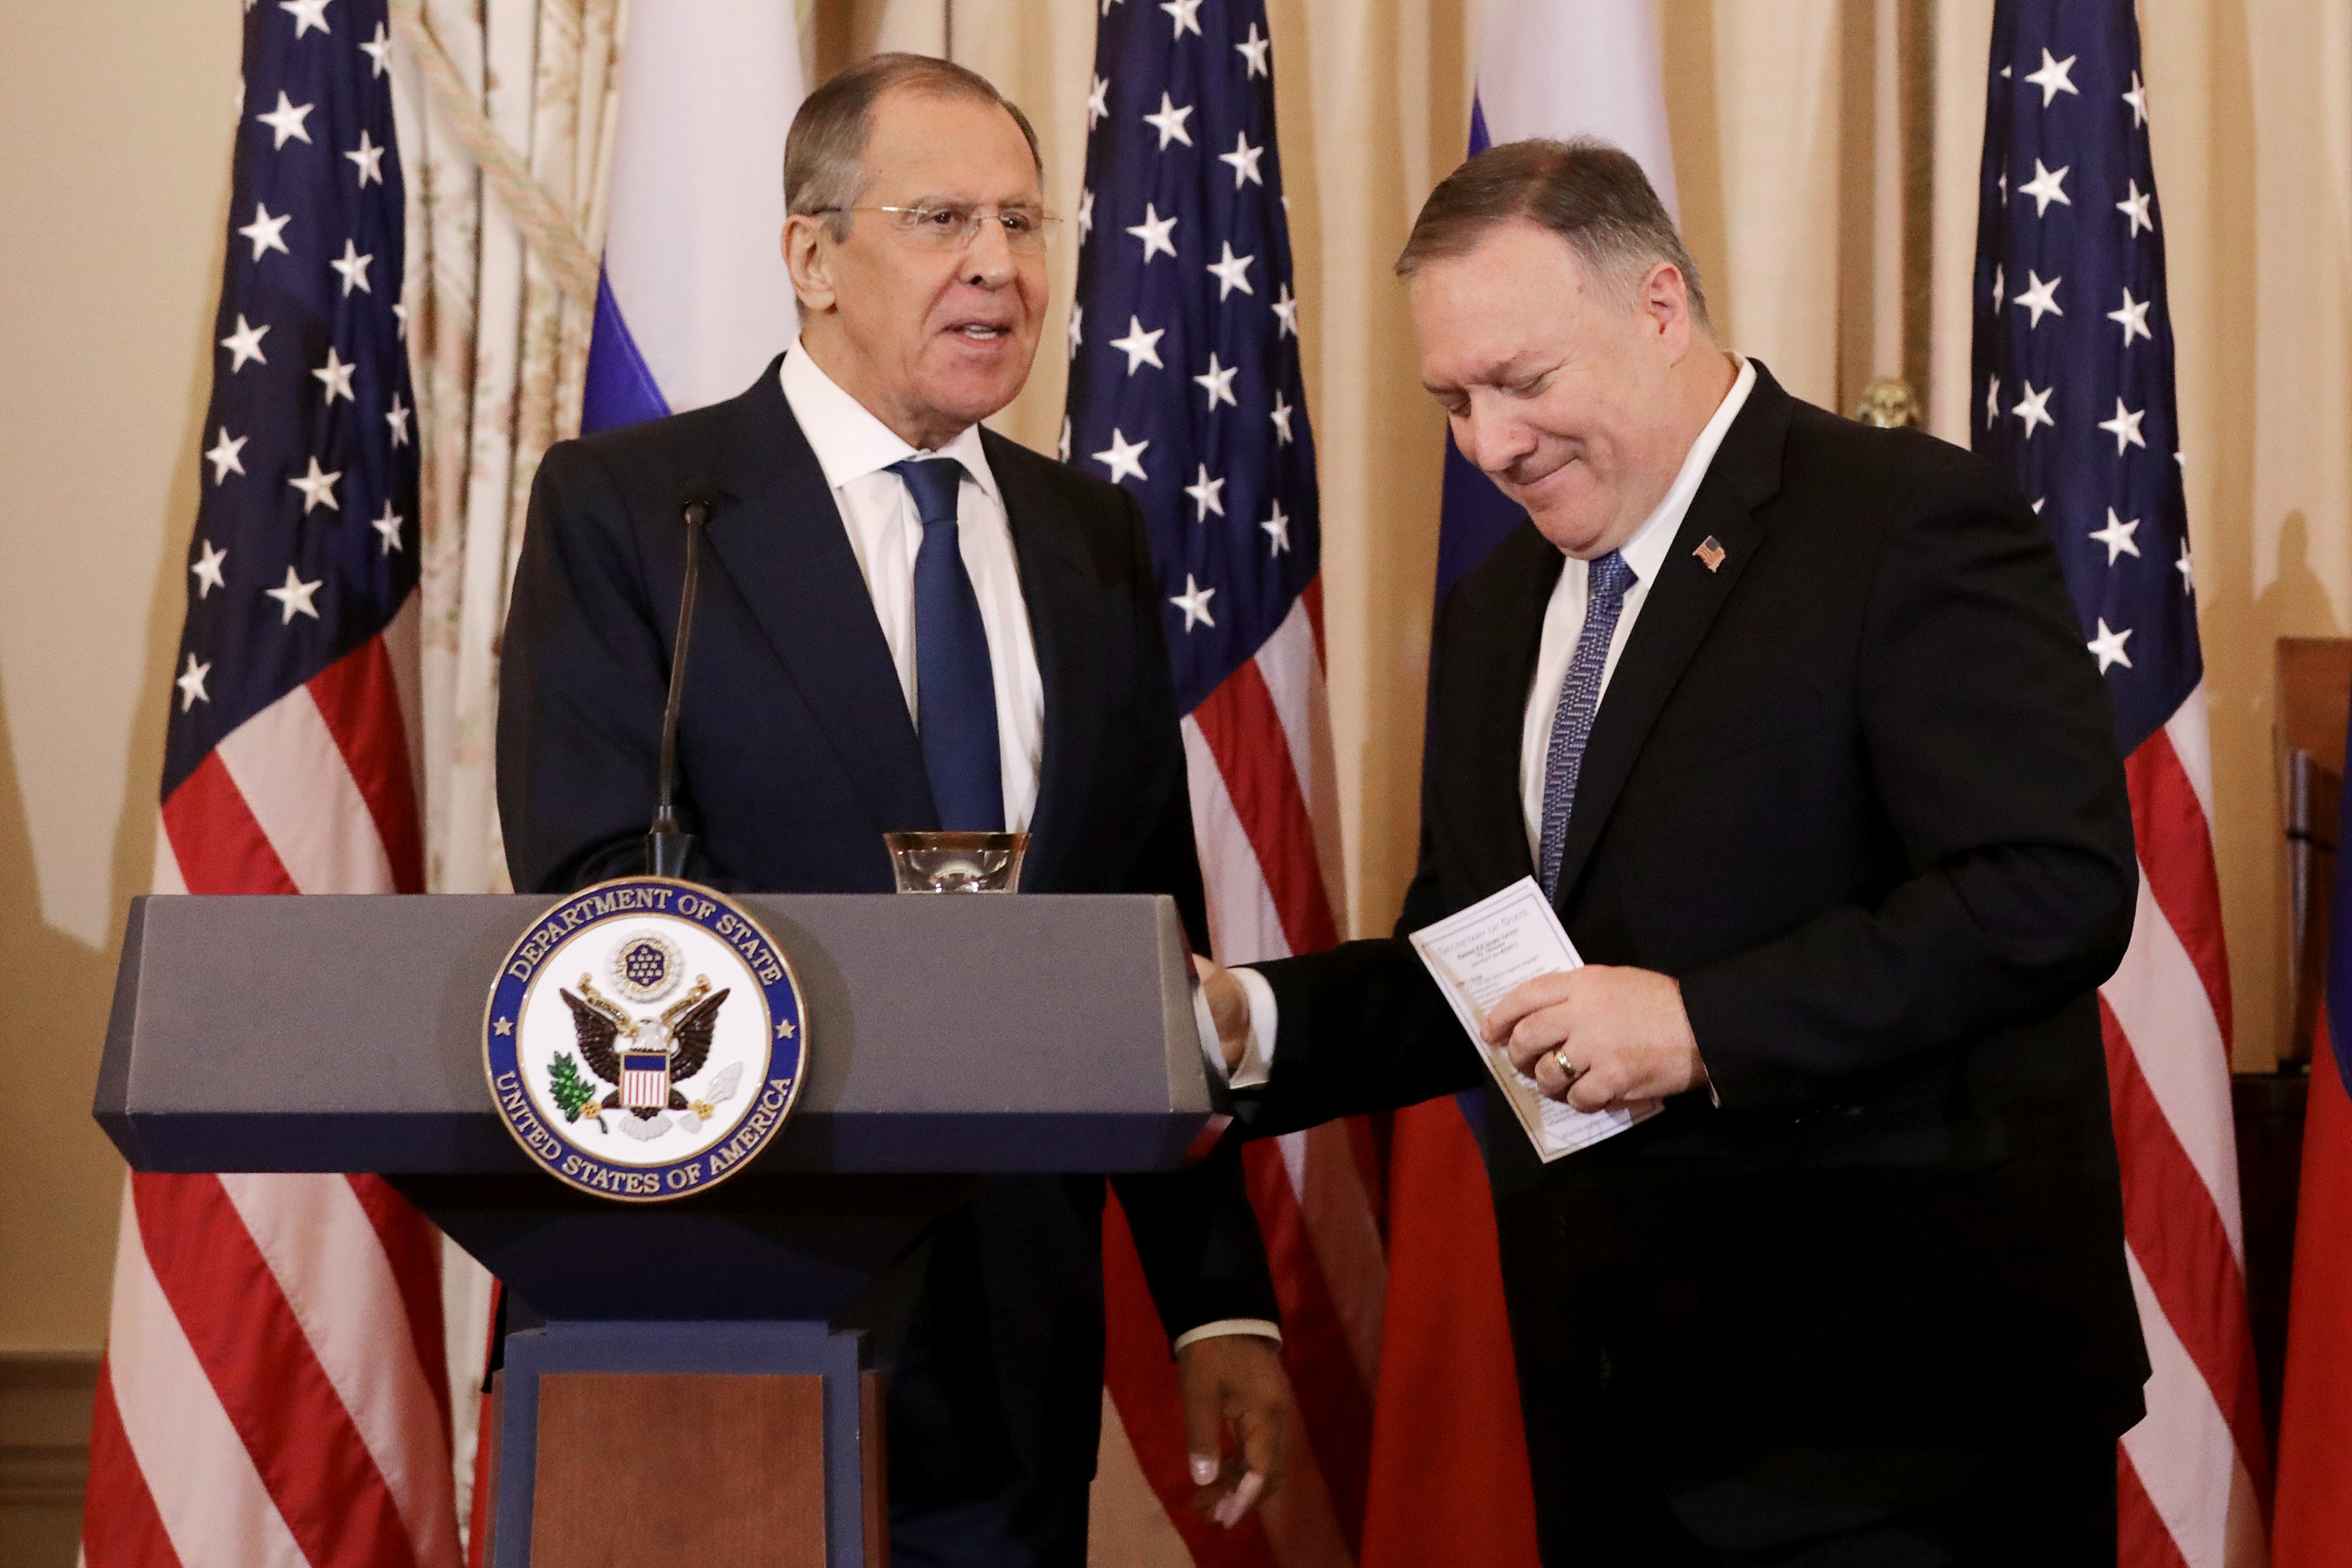 Russian Foreign Minister Sergey Lavrov and US Secretary of State Mike Pompeo shake hands at the conclusion of a joint news conference in the Franklin Room at the State Department in December 2019.